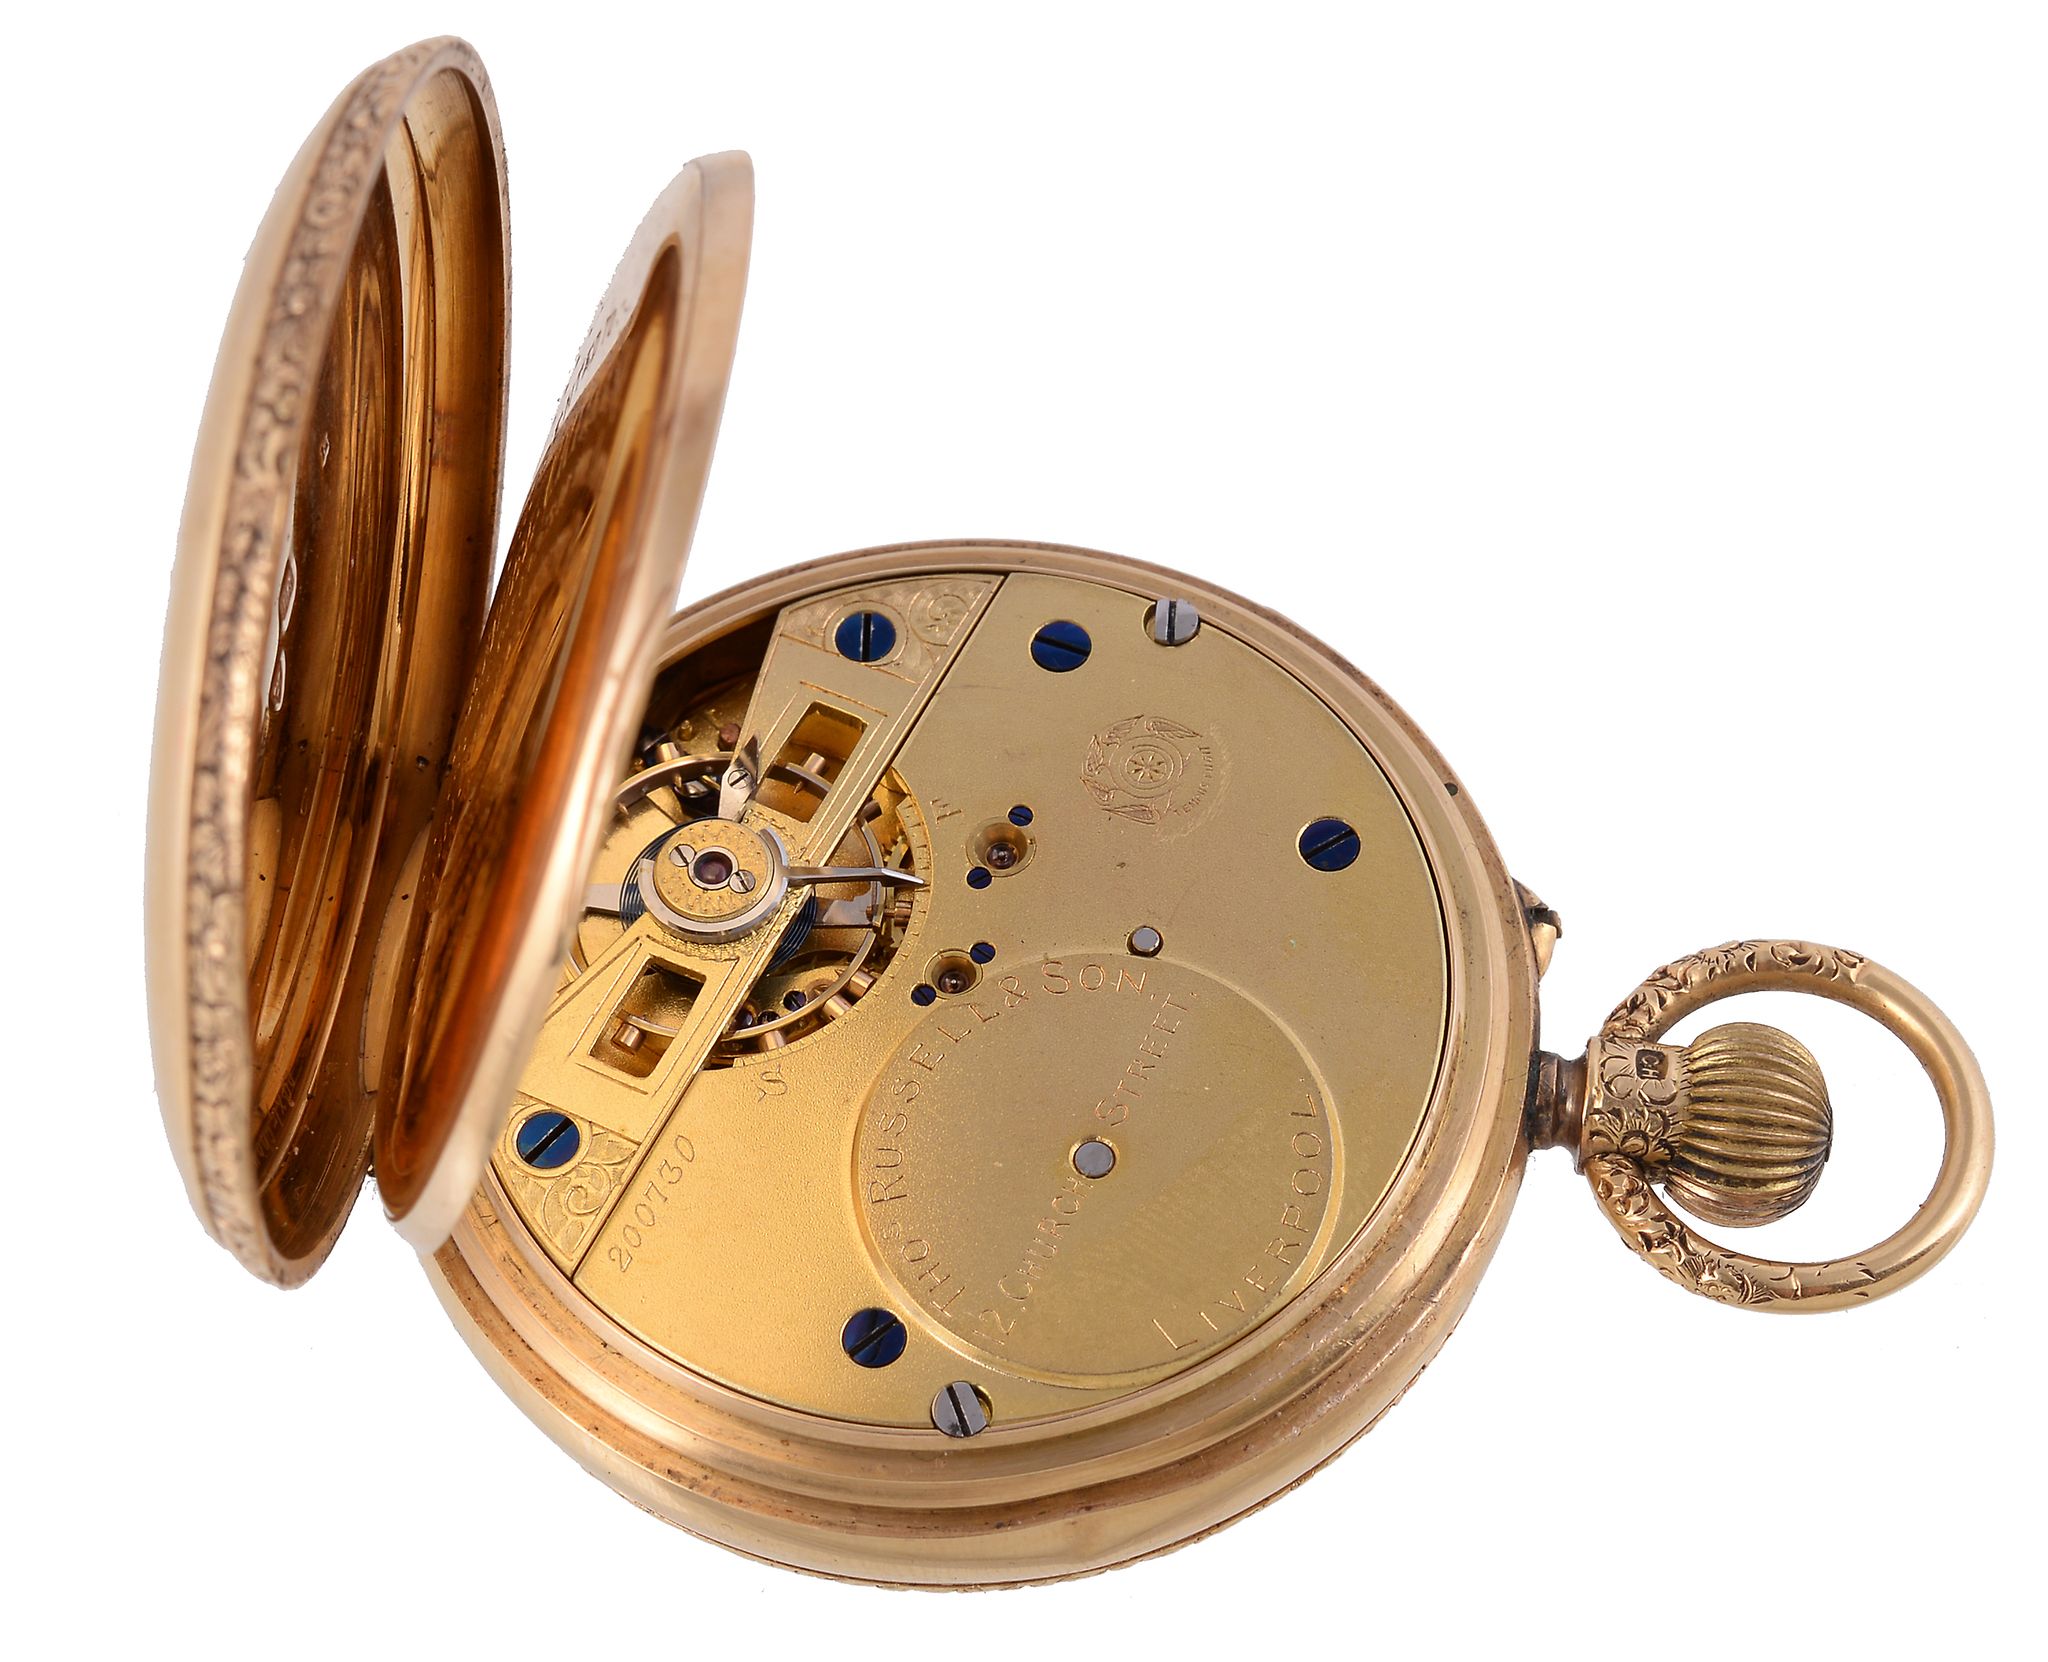 Thomas Russell & Son, an 18 carat gold open face keyless wind pocket watch, no. 200730, hallmarked - Image 2 of 2